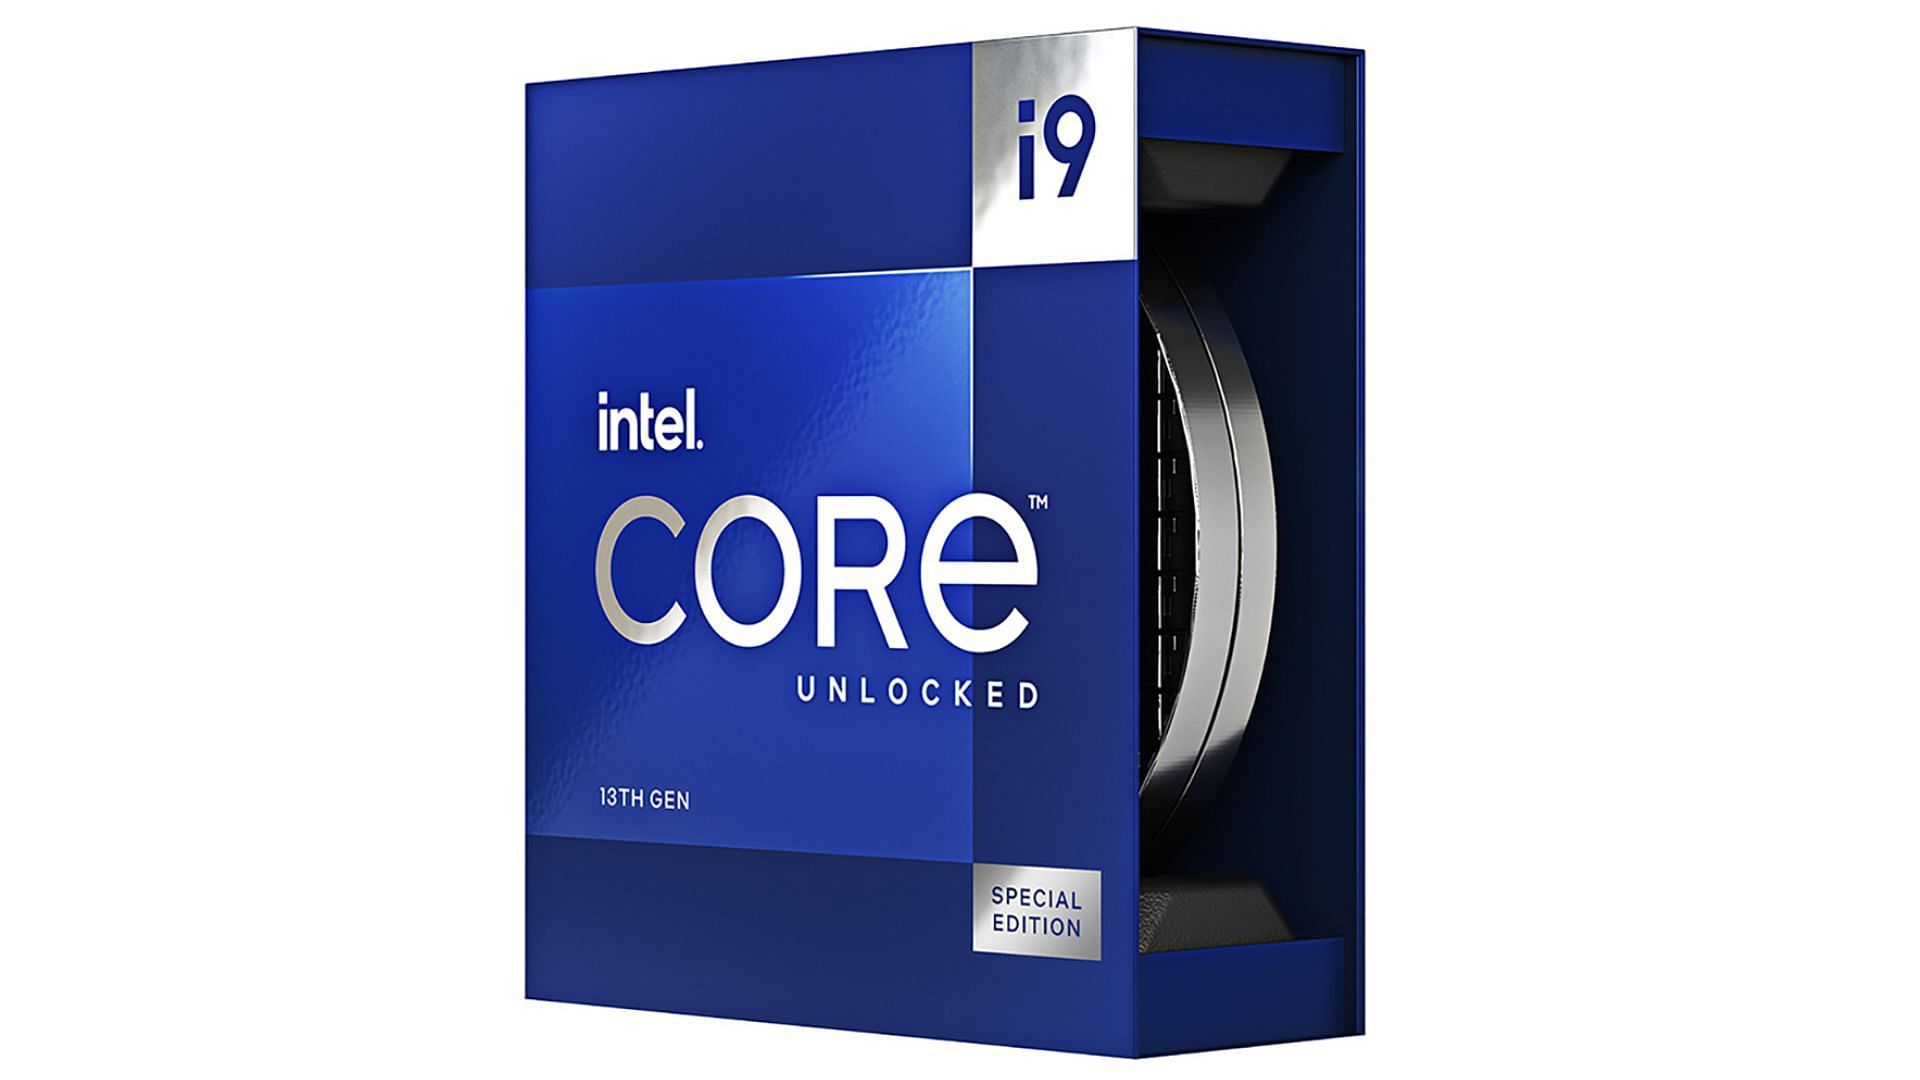 Do you need an Intel Core i9 for gaming PCs?